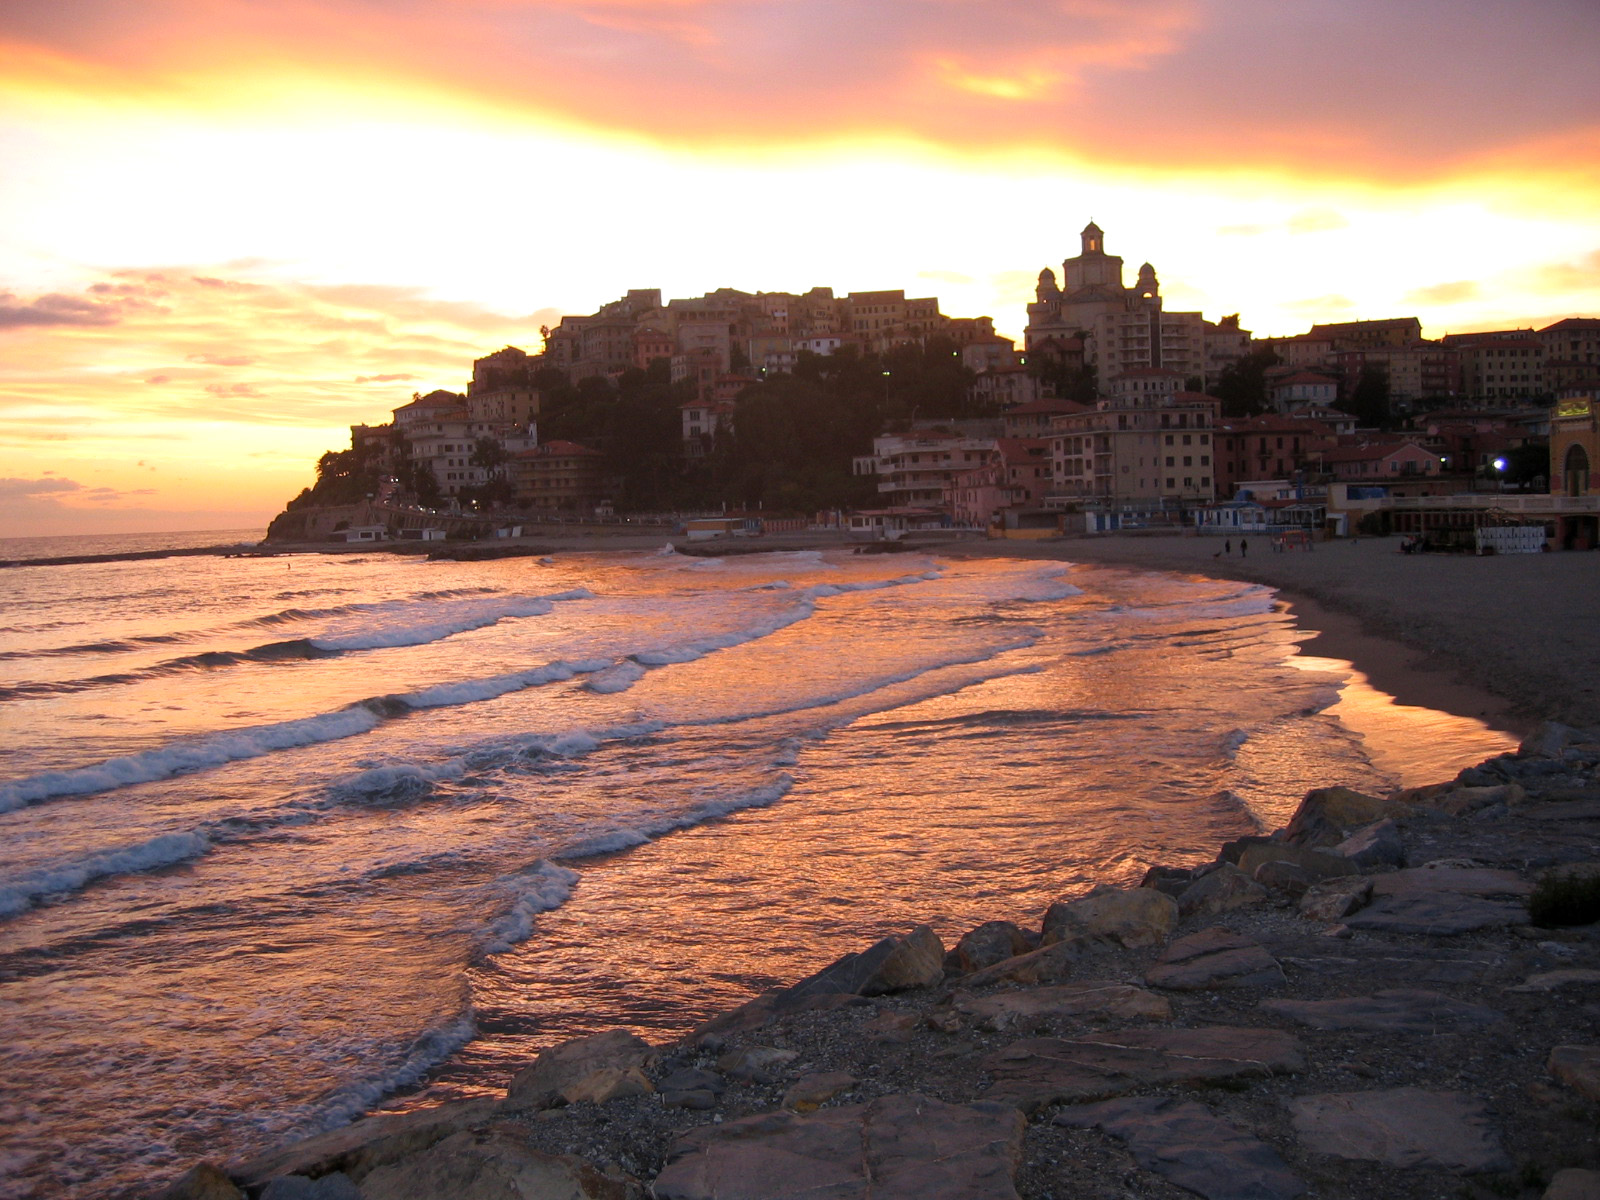 A sunset in Liguria (Italy) ...not mine, btw